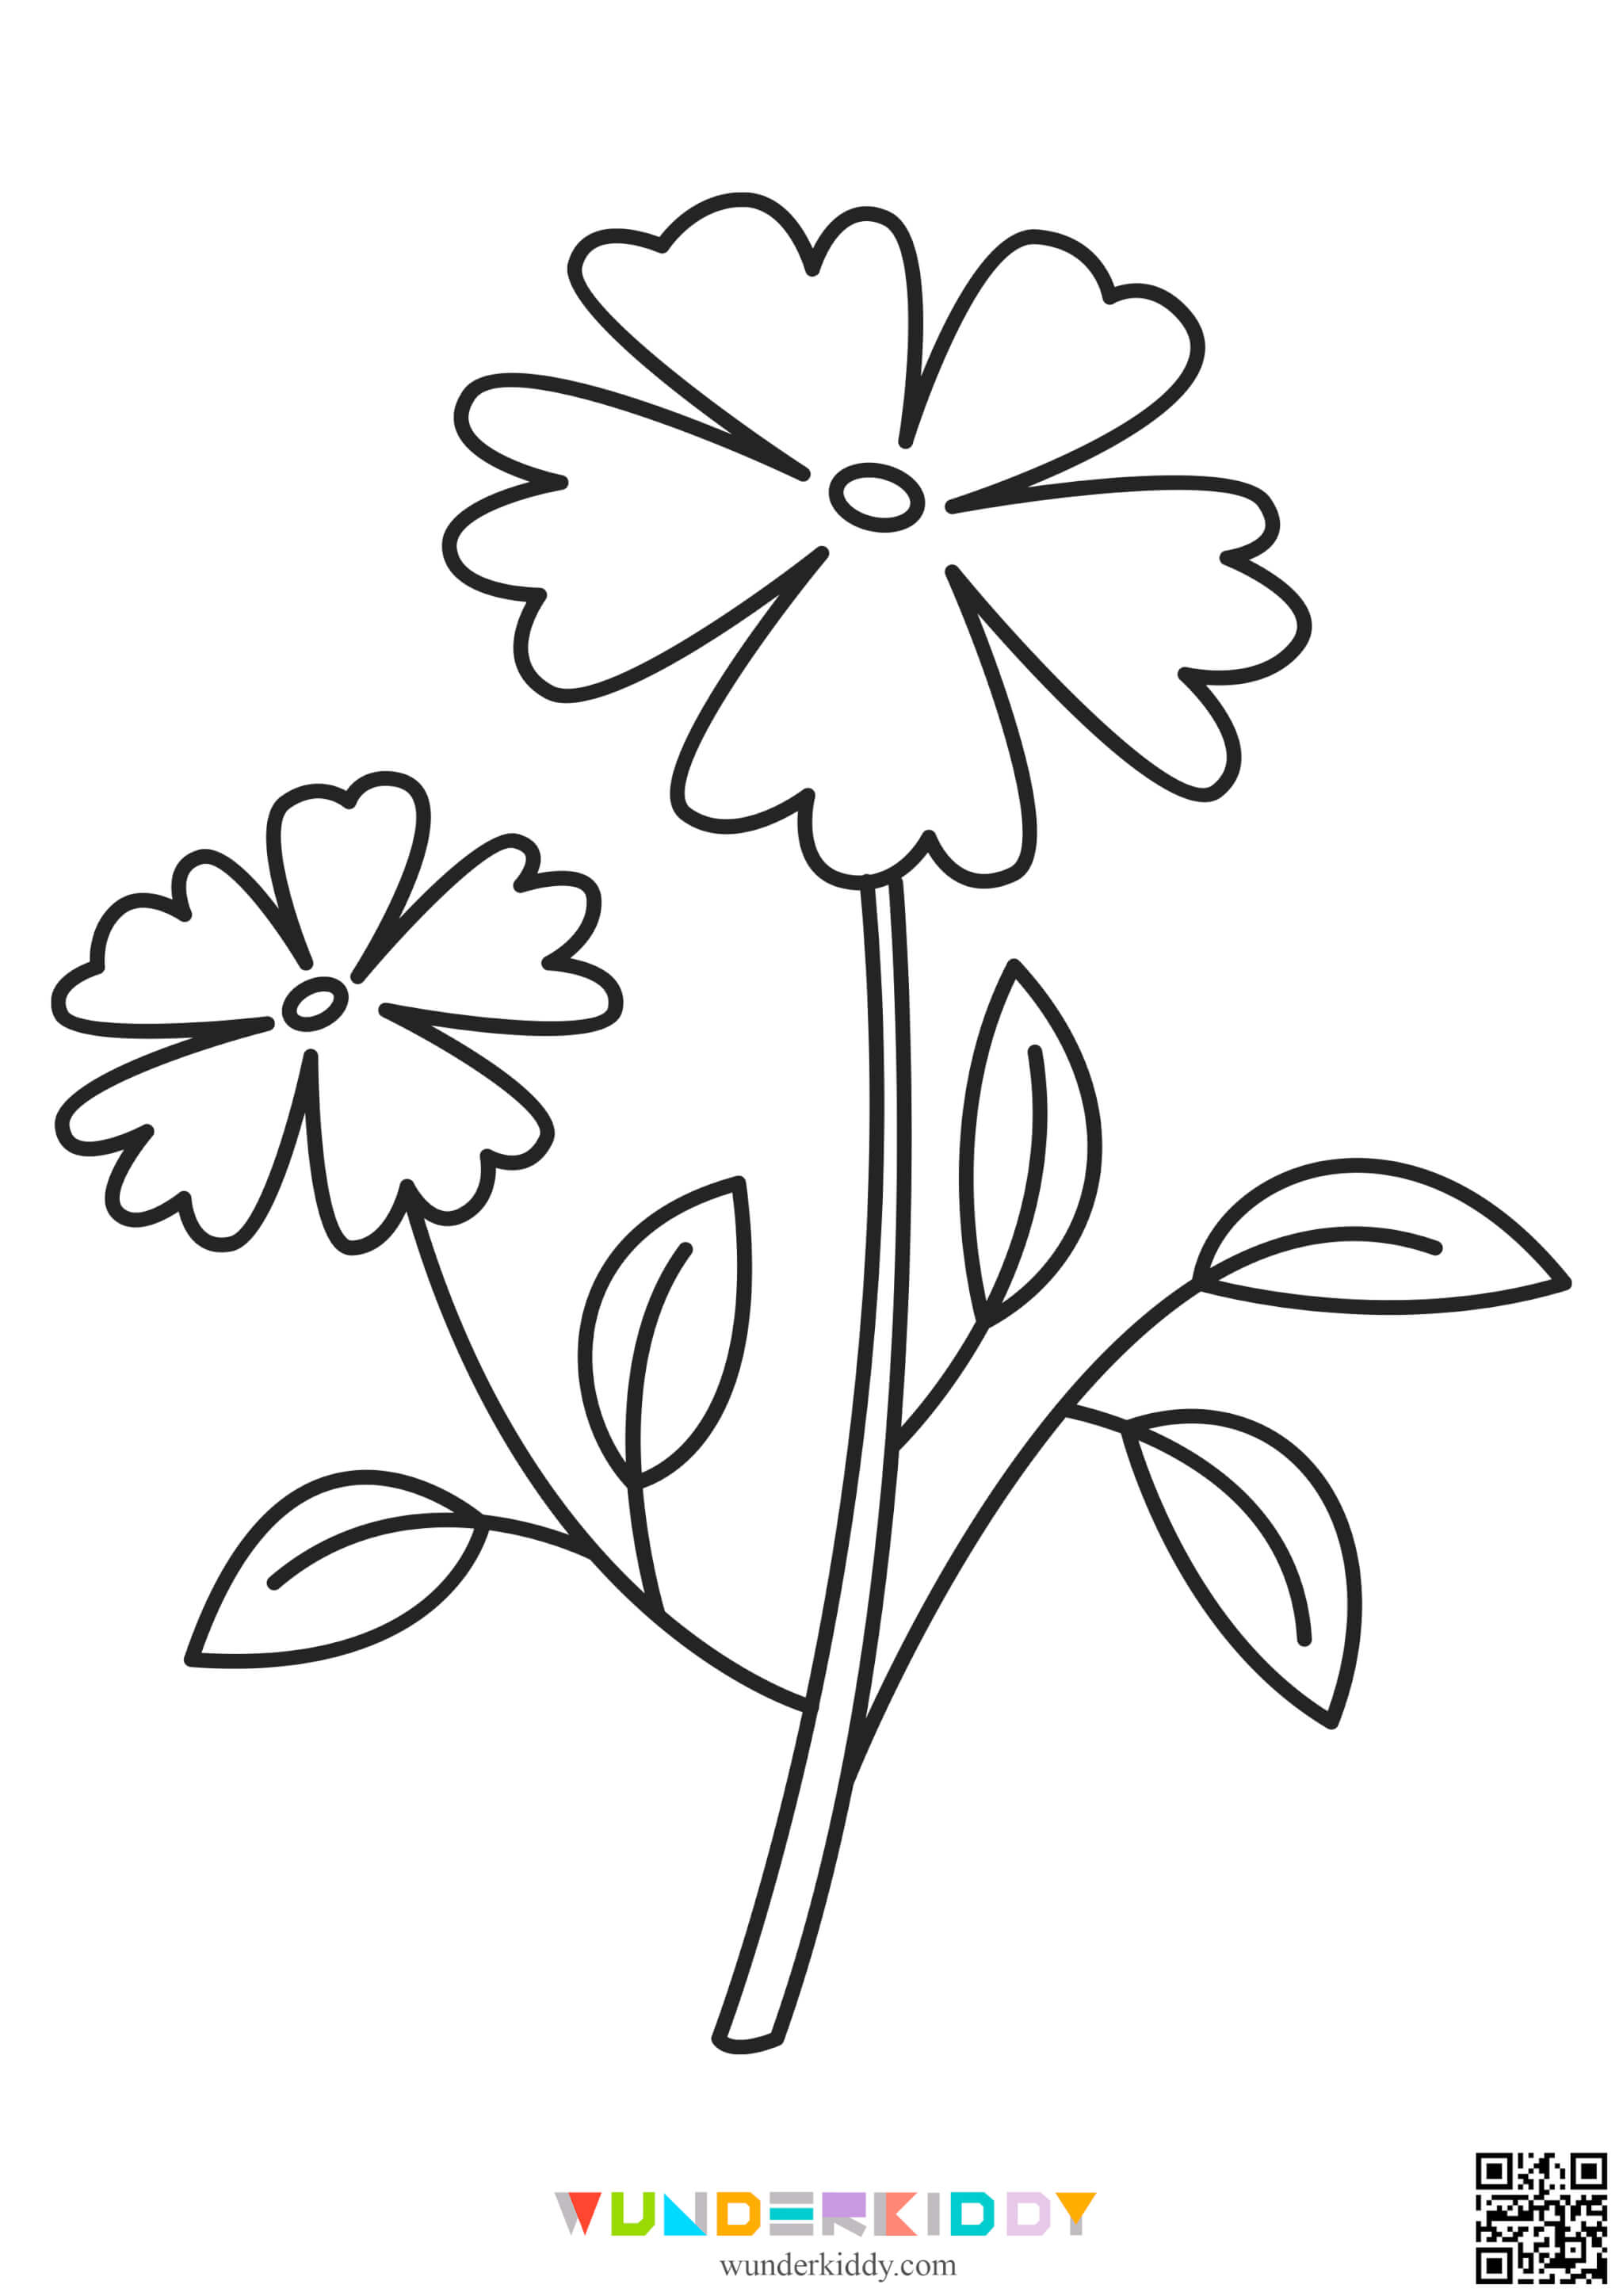 Flower Printable Coloring Pages - Image 17